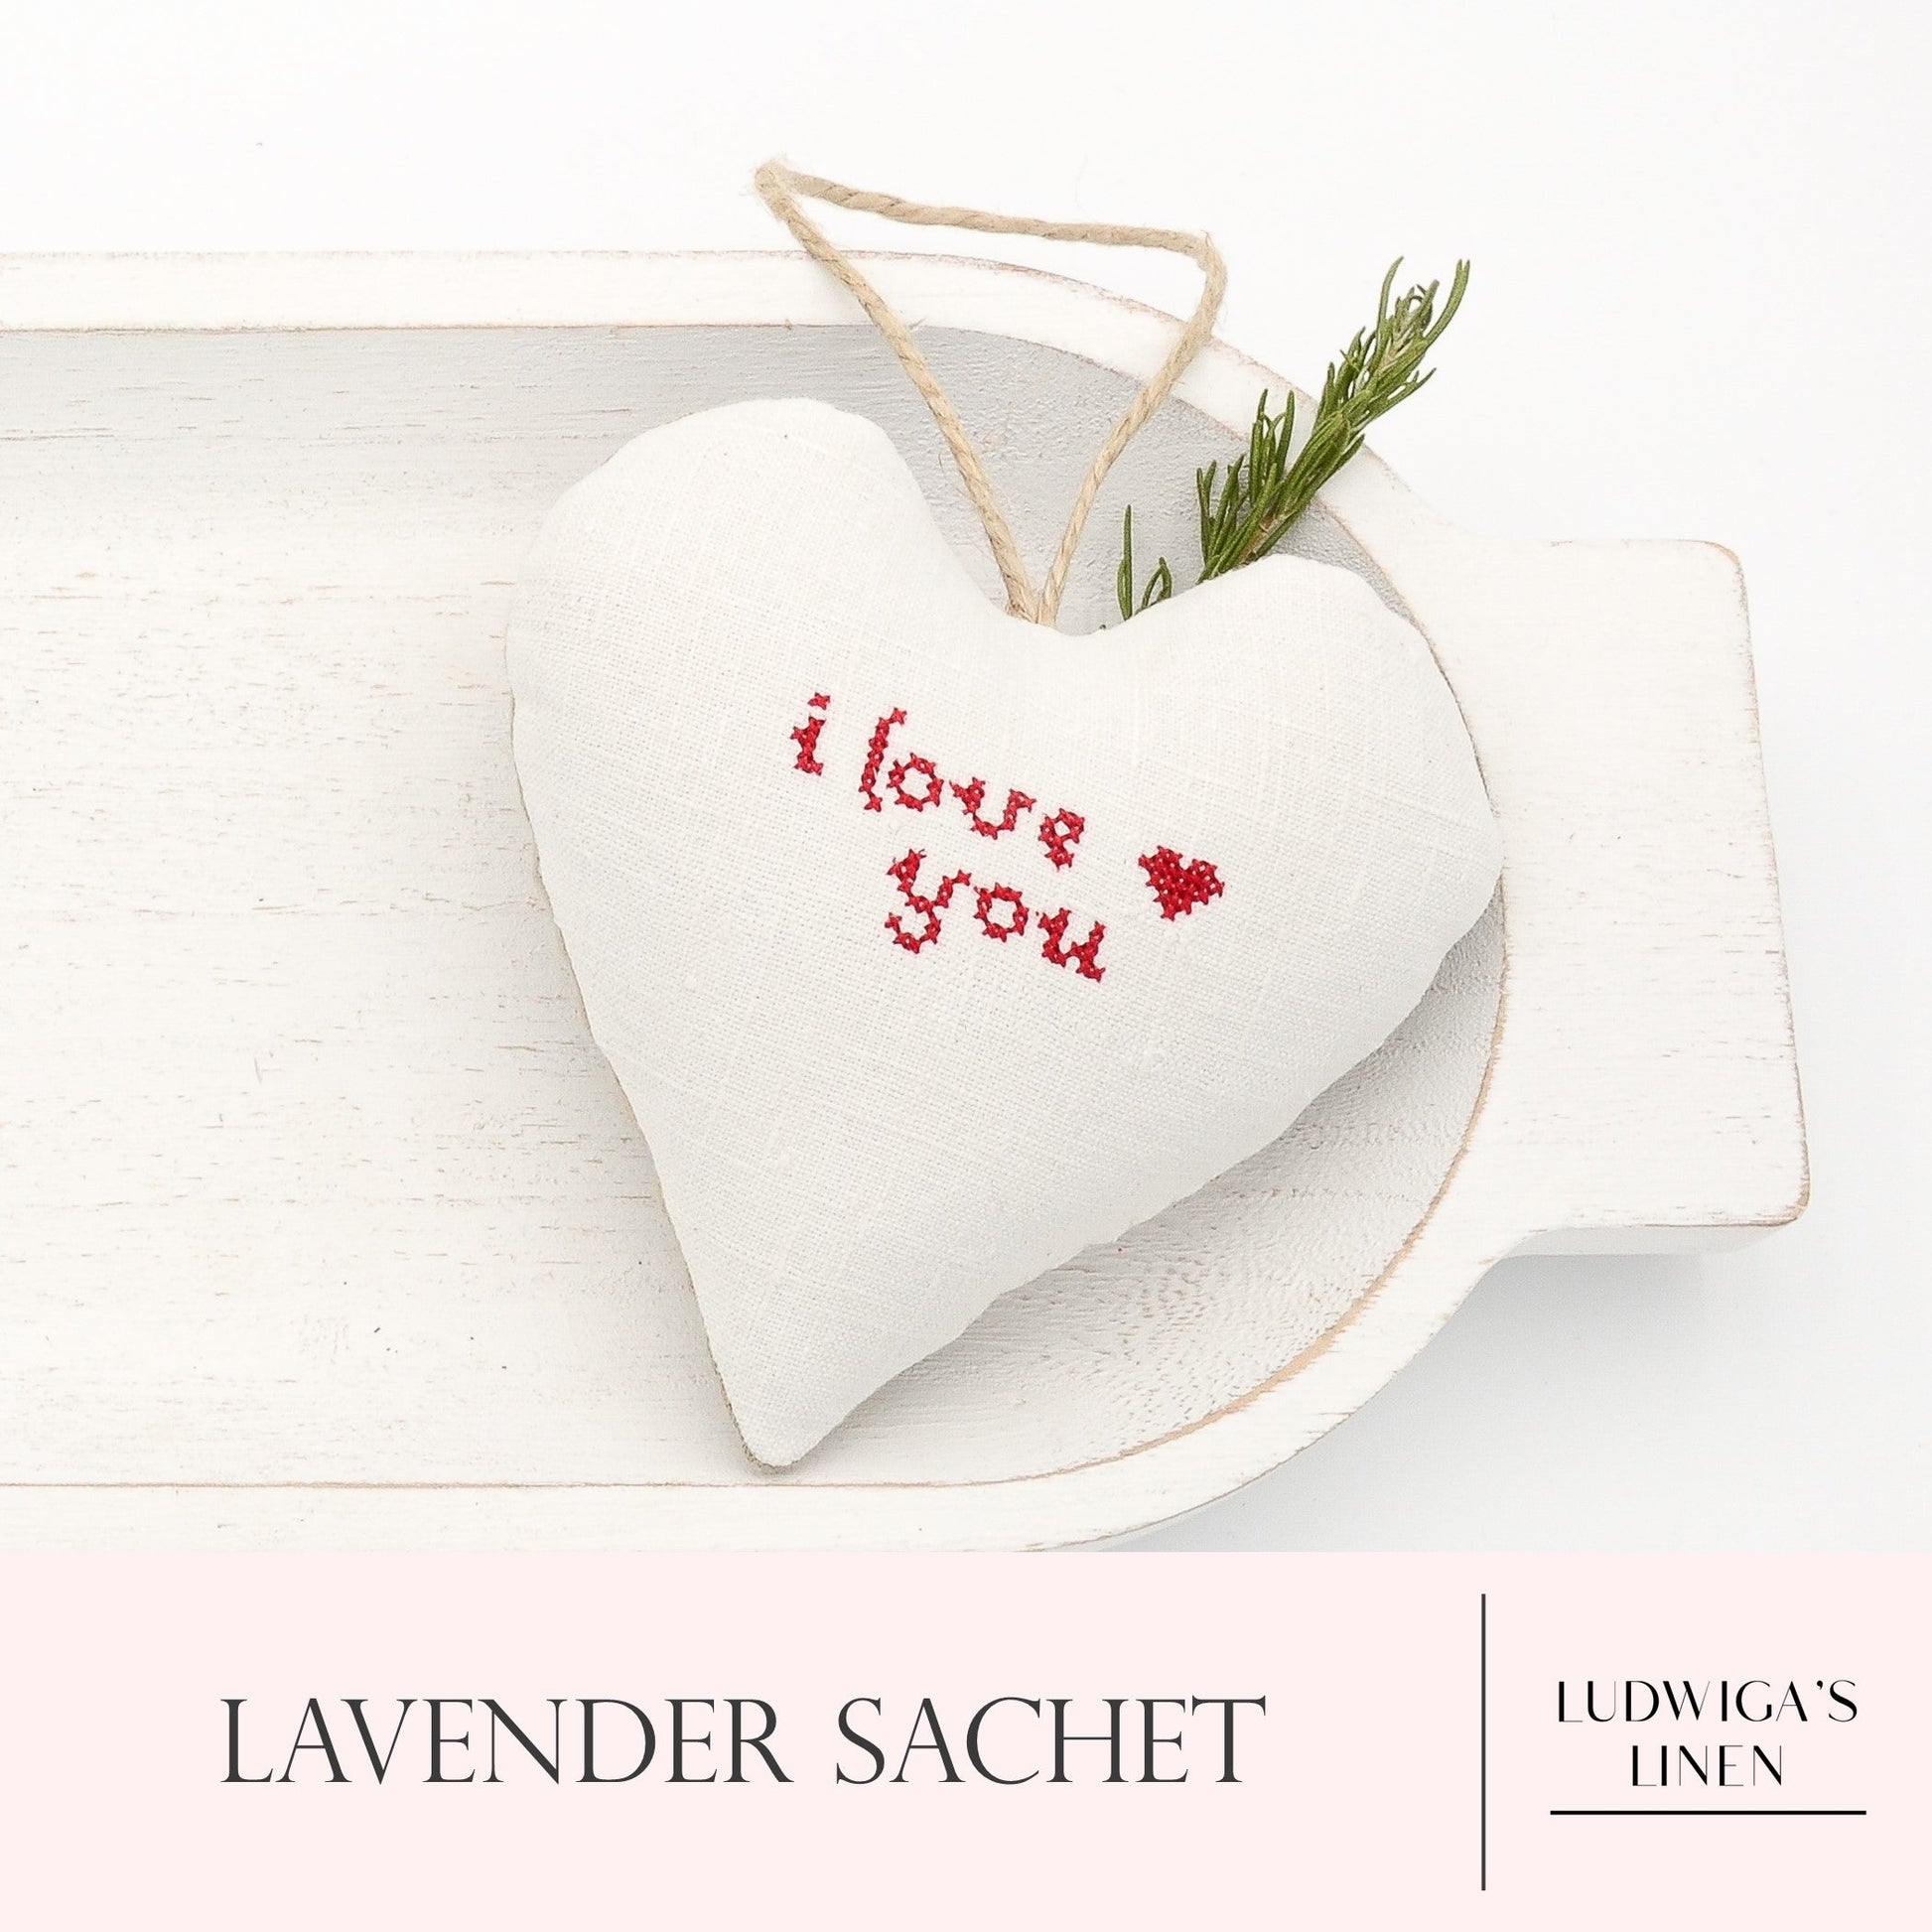 Antique/vintage European white linen lavender sachet heart with "I love you" embroidered in red, hemp twine tie and filled with high quality lavender from Provence France